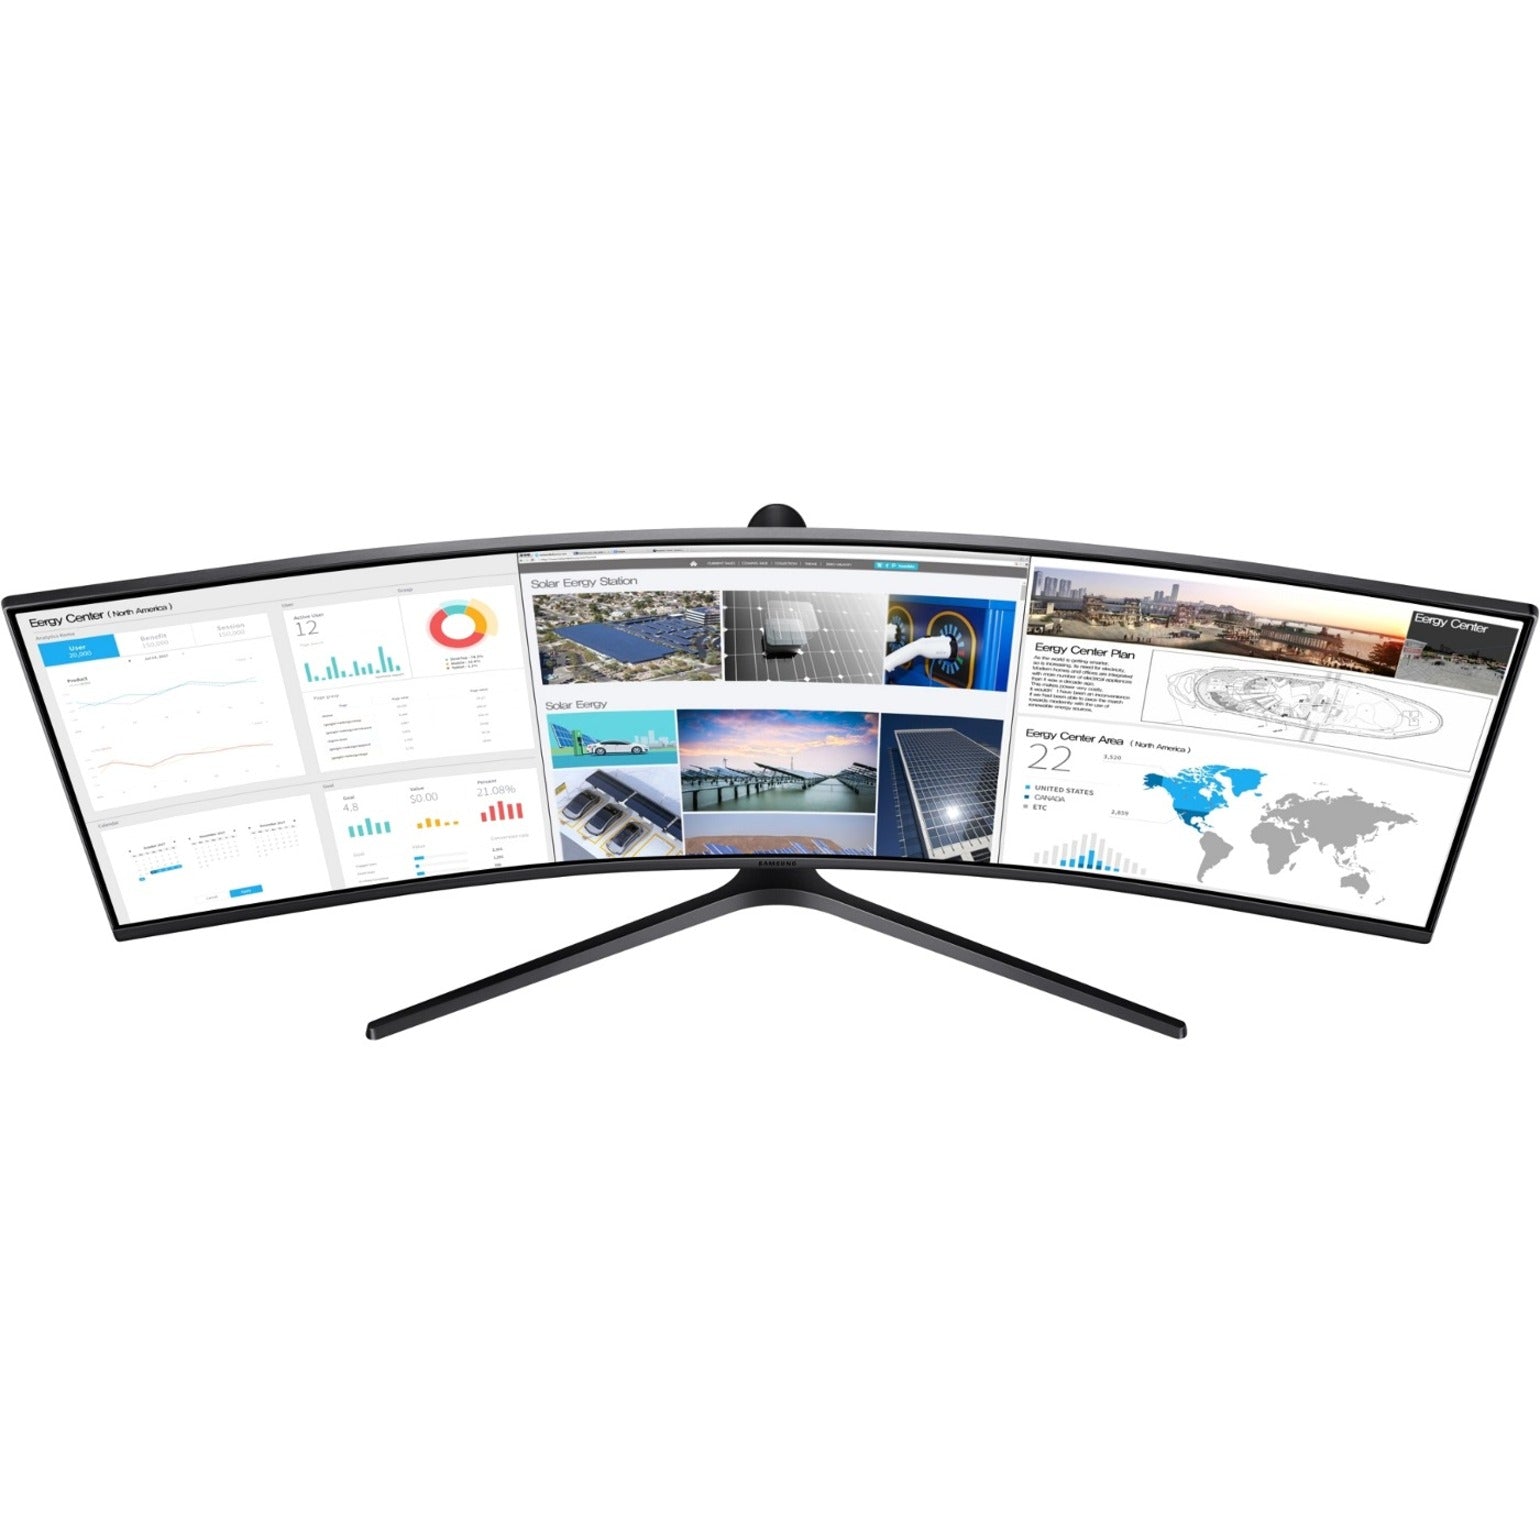 Samsung C49J890DKN Super Ultra-Wide Monitor with USB-C for Business, 49in, 32:9, Curved VA Panel, 3840x1080, KVM Switch, USB-Cx2/DP/HDMI/USBx3, Speakers, Adjustable Stand, 3 Year Warranty